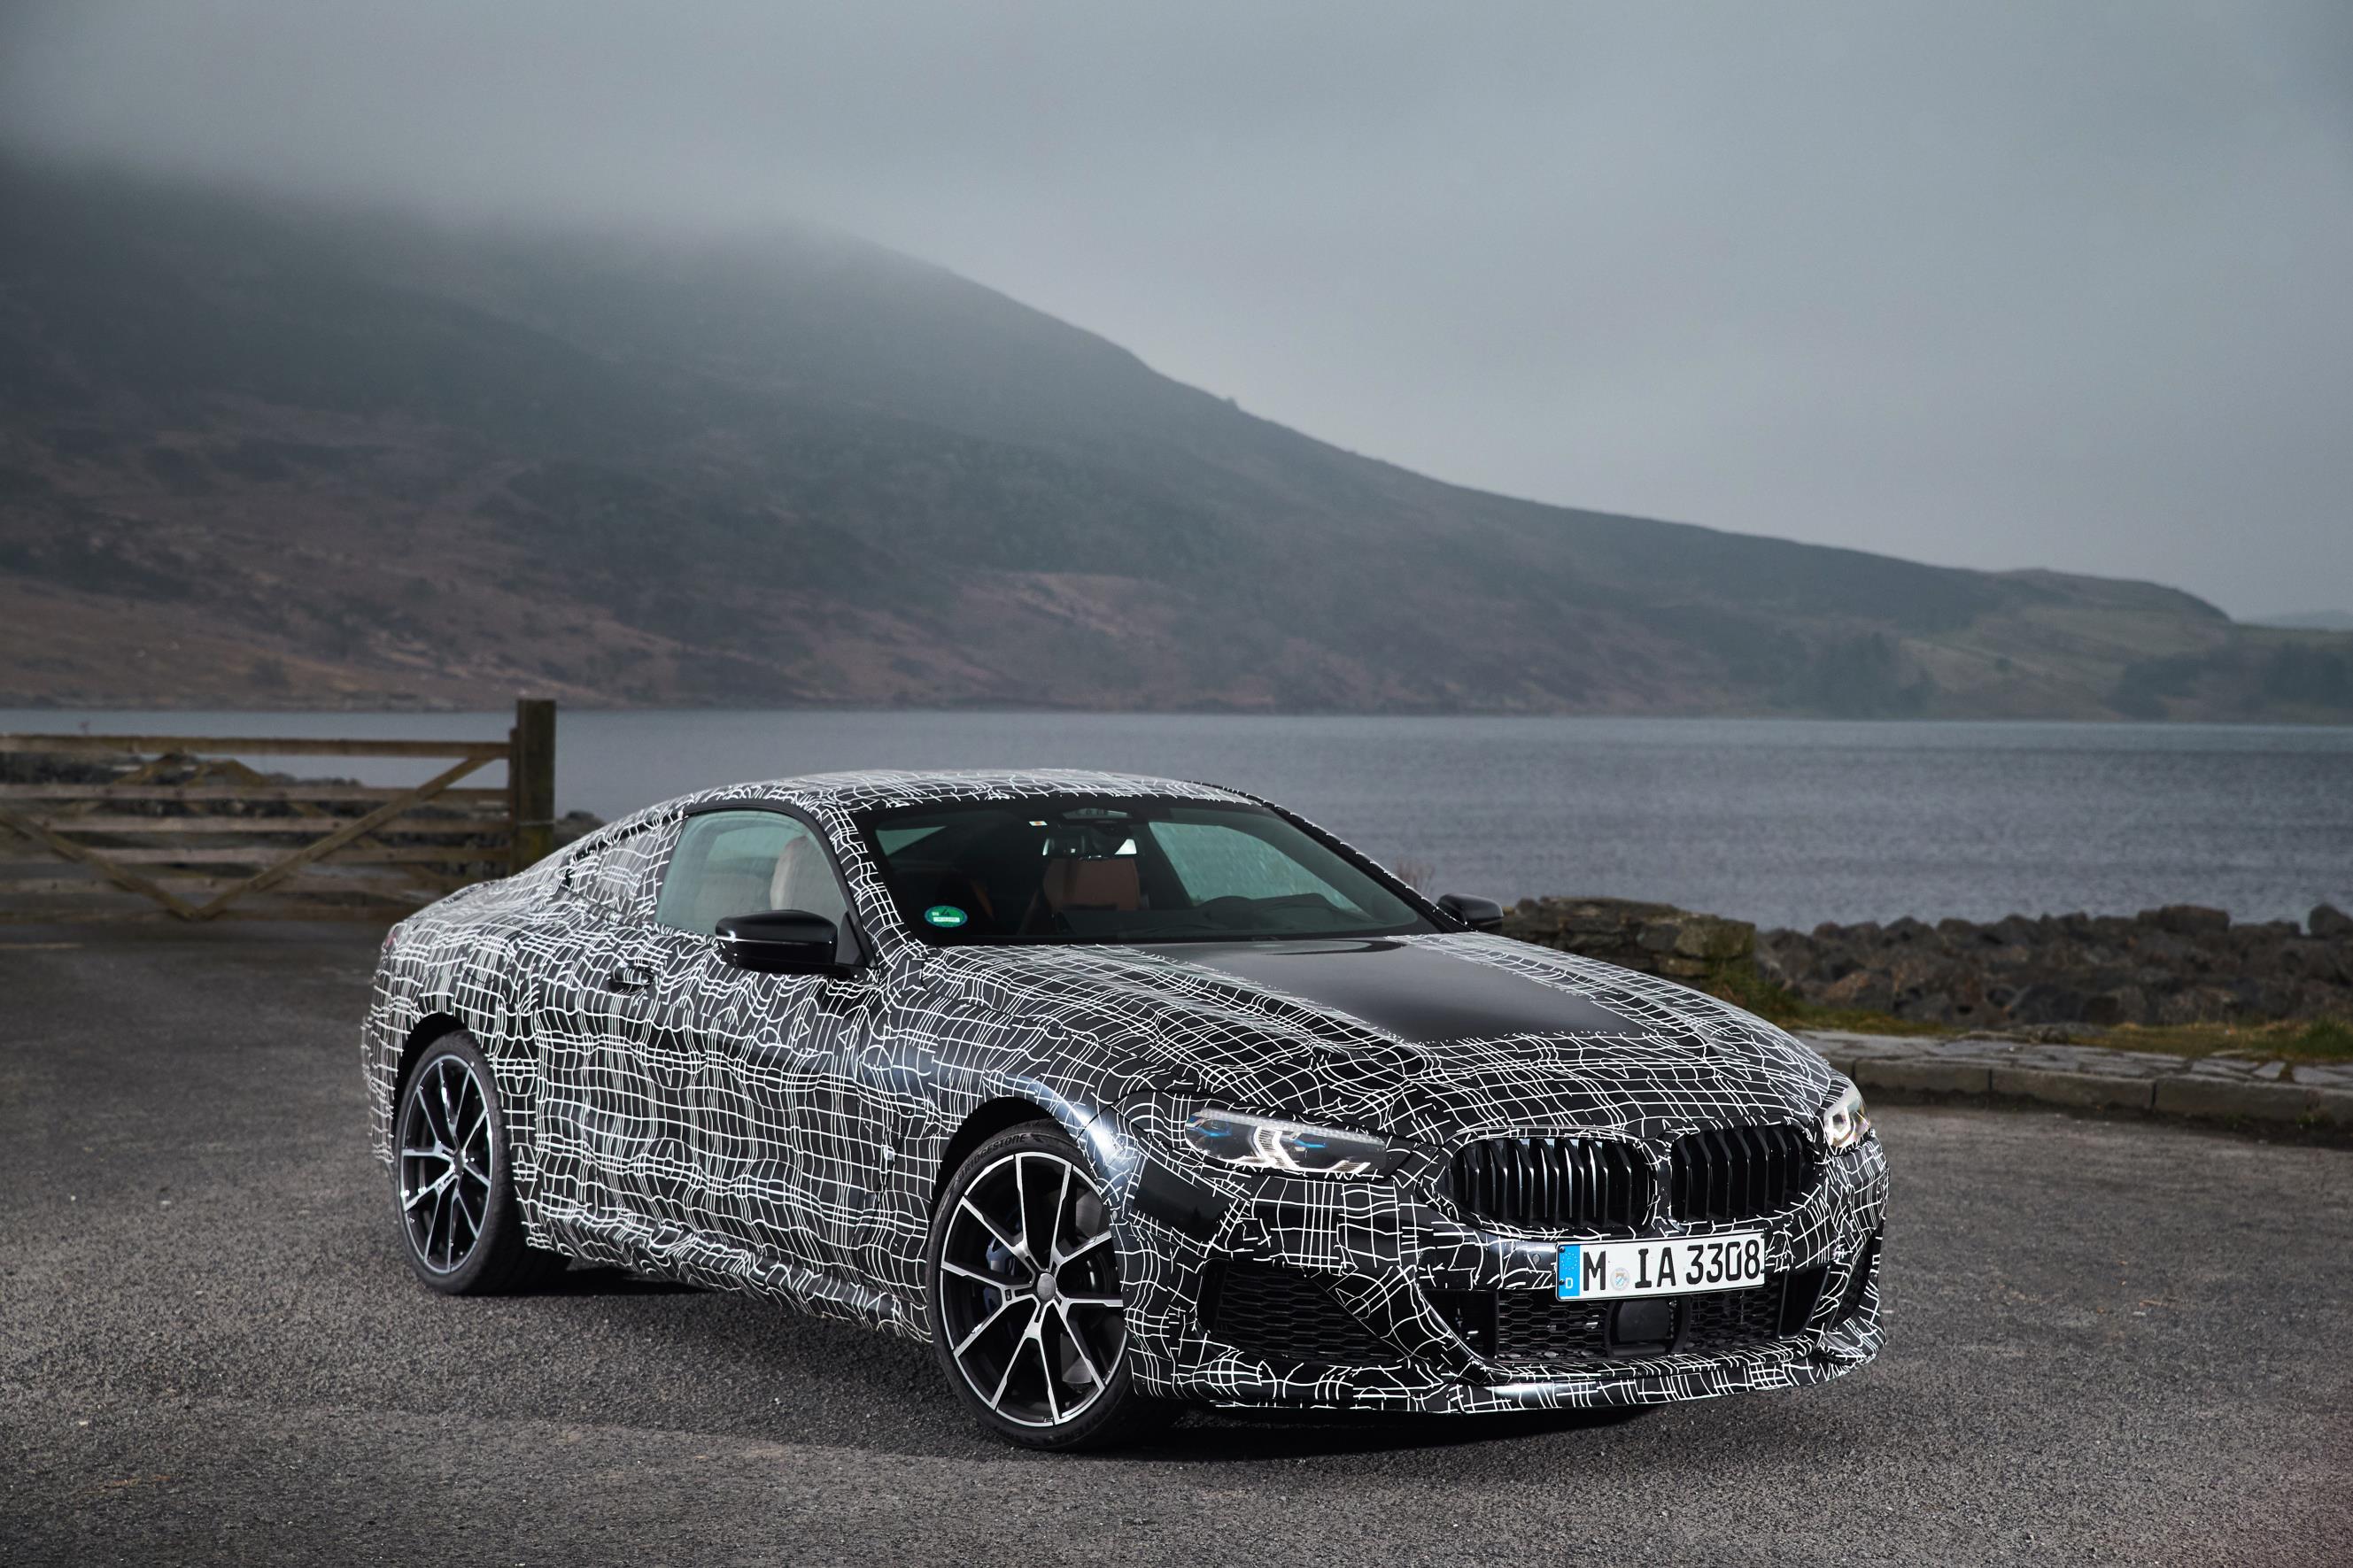 BMW M850i xDrive Coupe Getting Ready with 530 hp V8